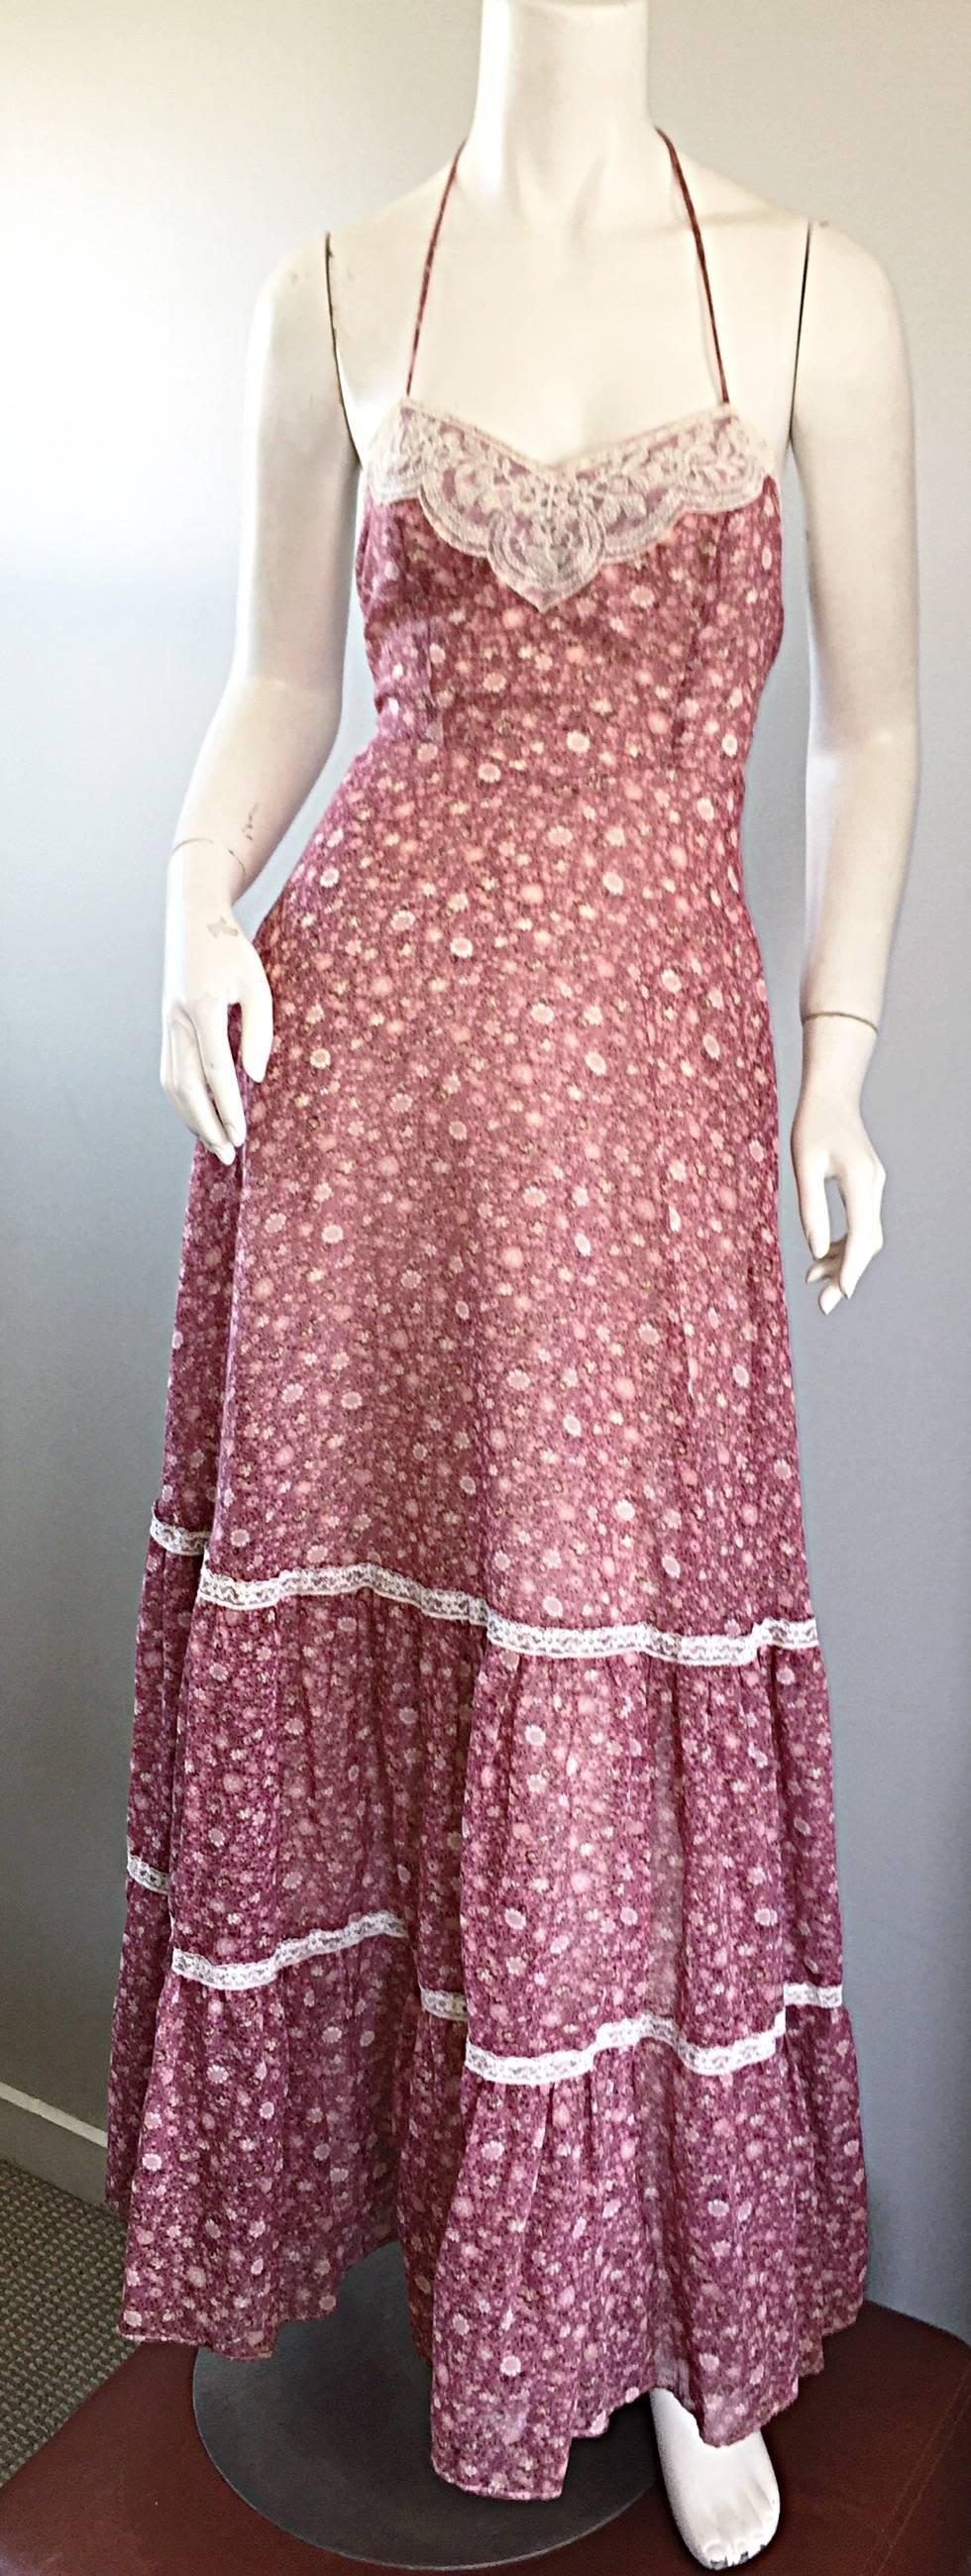 Amazing vintage 70s boho prairie maxi dress! Raspberry pink mini flowers printed throughout, with ivory lace accents at the bust, and at the tiers on the skirt. Sexy open back with ties at both the waist and back neck. Full metal zipper up the back.